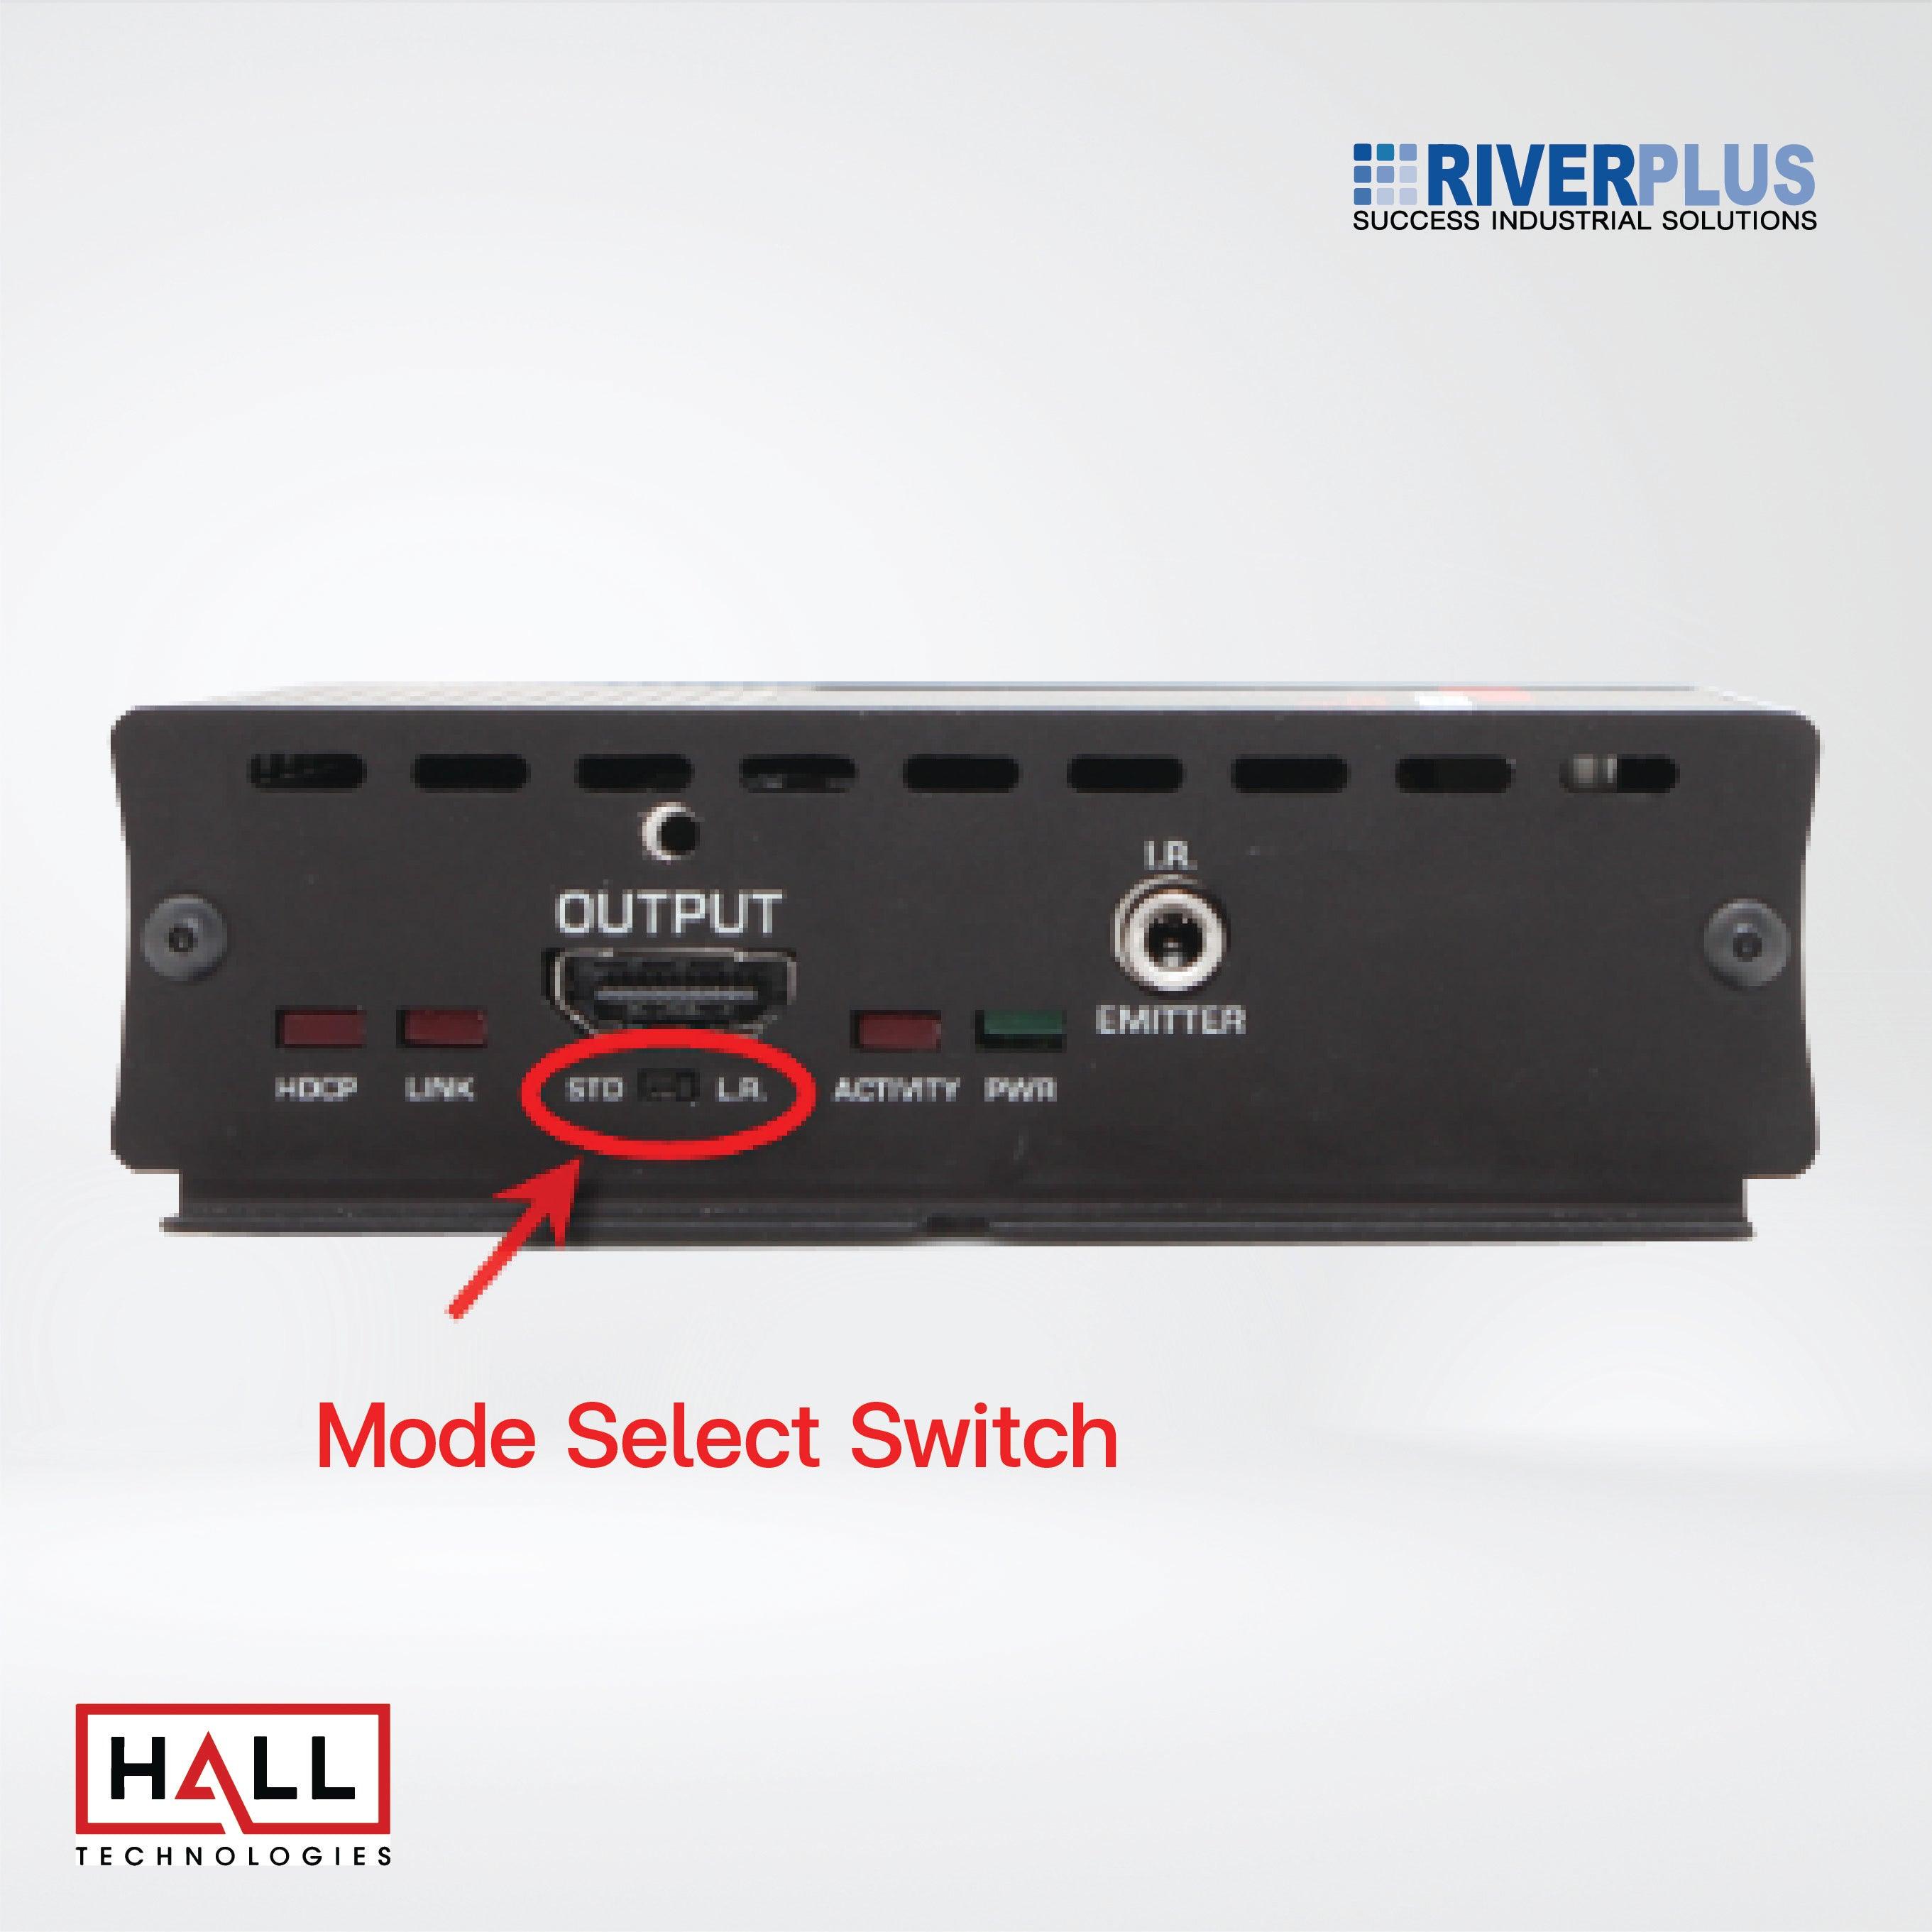 UHBX-R-PSE HDBaseT Receiver with HDMI output, Bidirectional IR, RS232, and PoH Source (Power over HDBaseT) - Riverplus